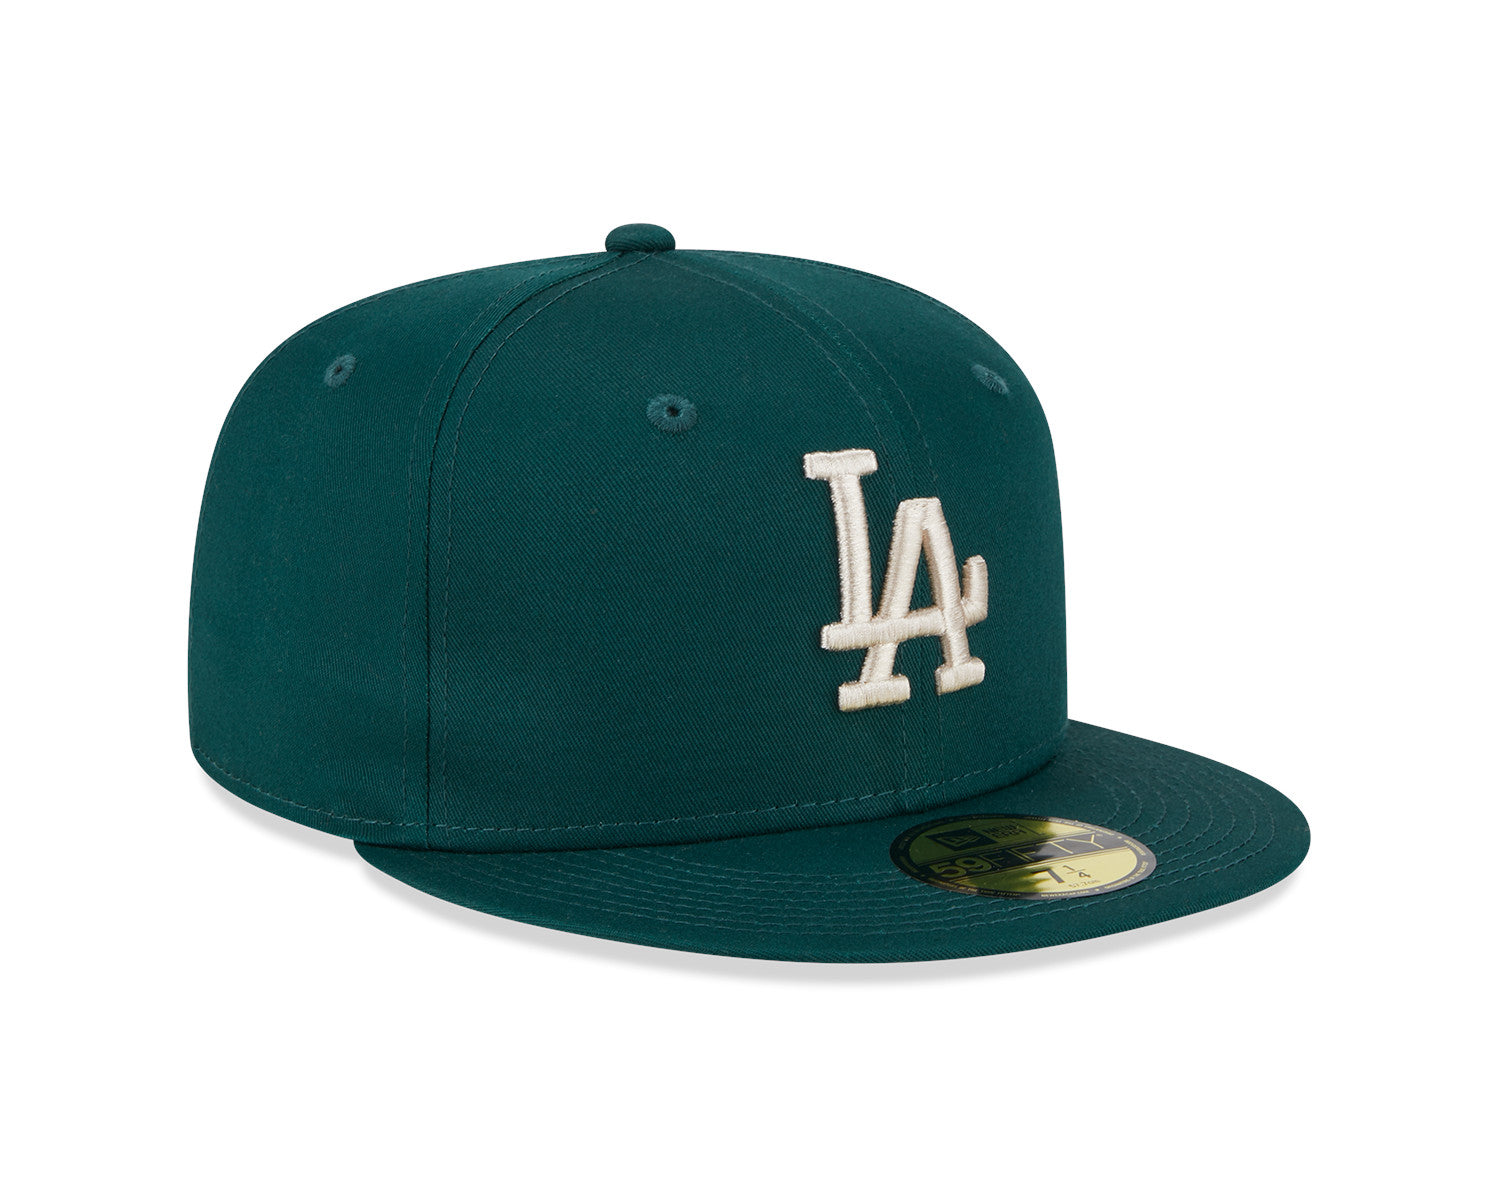 Dodgers Fitted New Era 59Fifty 60th Anniversary Sky Cap Hat Pink